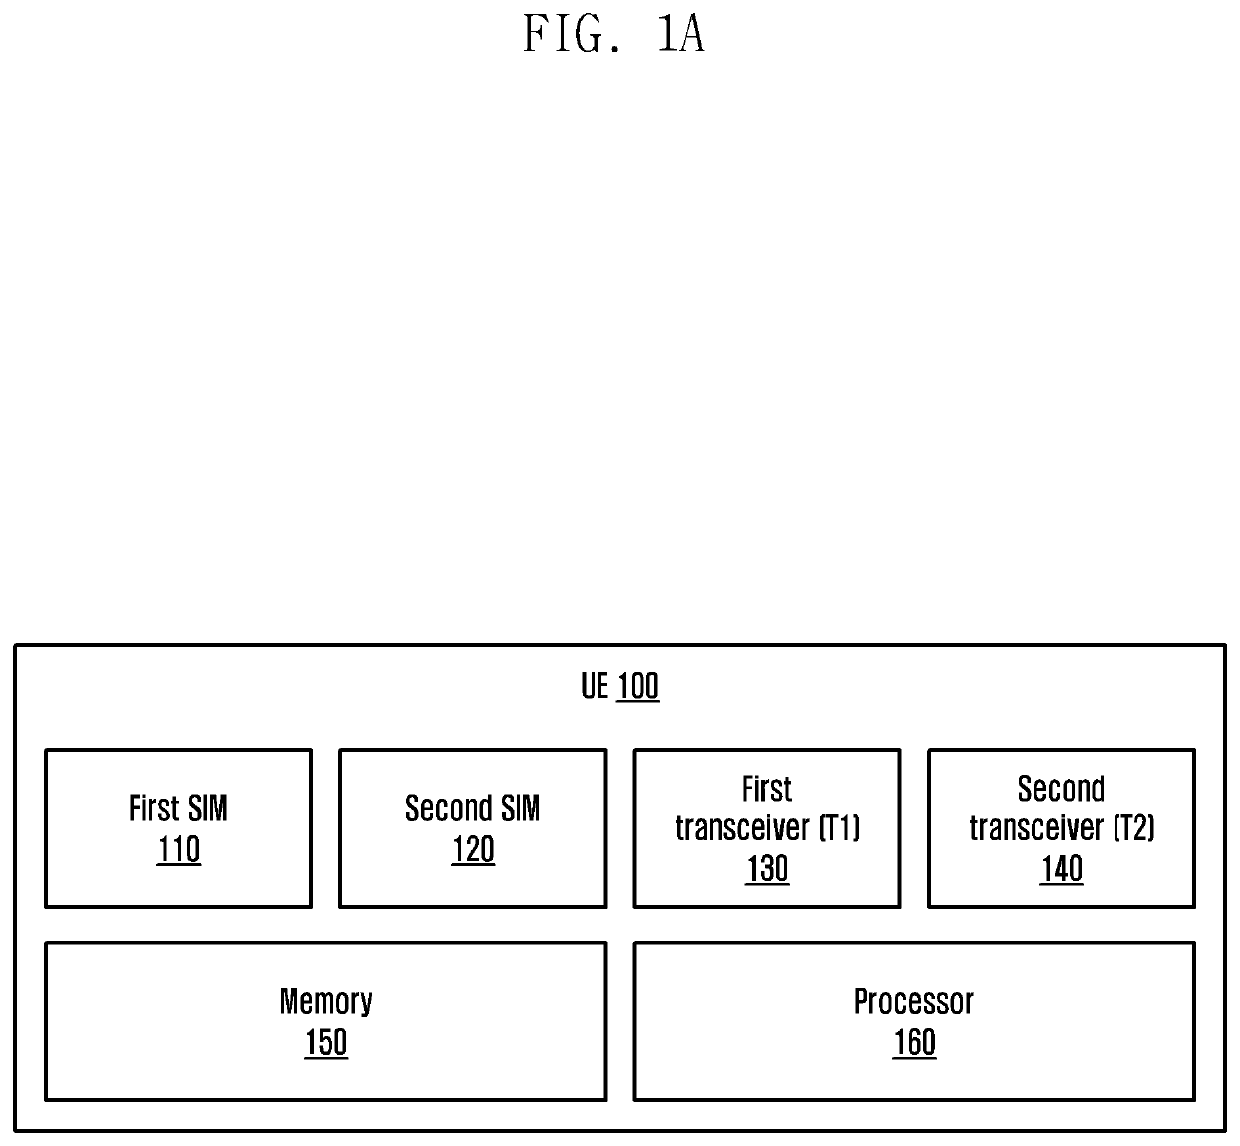 Method and ue for optimizing resources of wireless communication network while providing 5g services